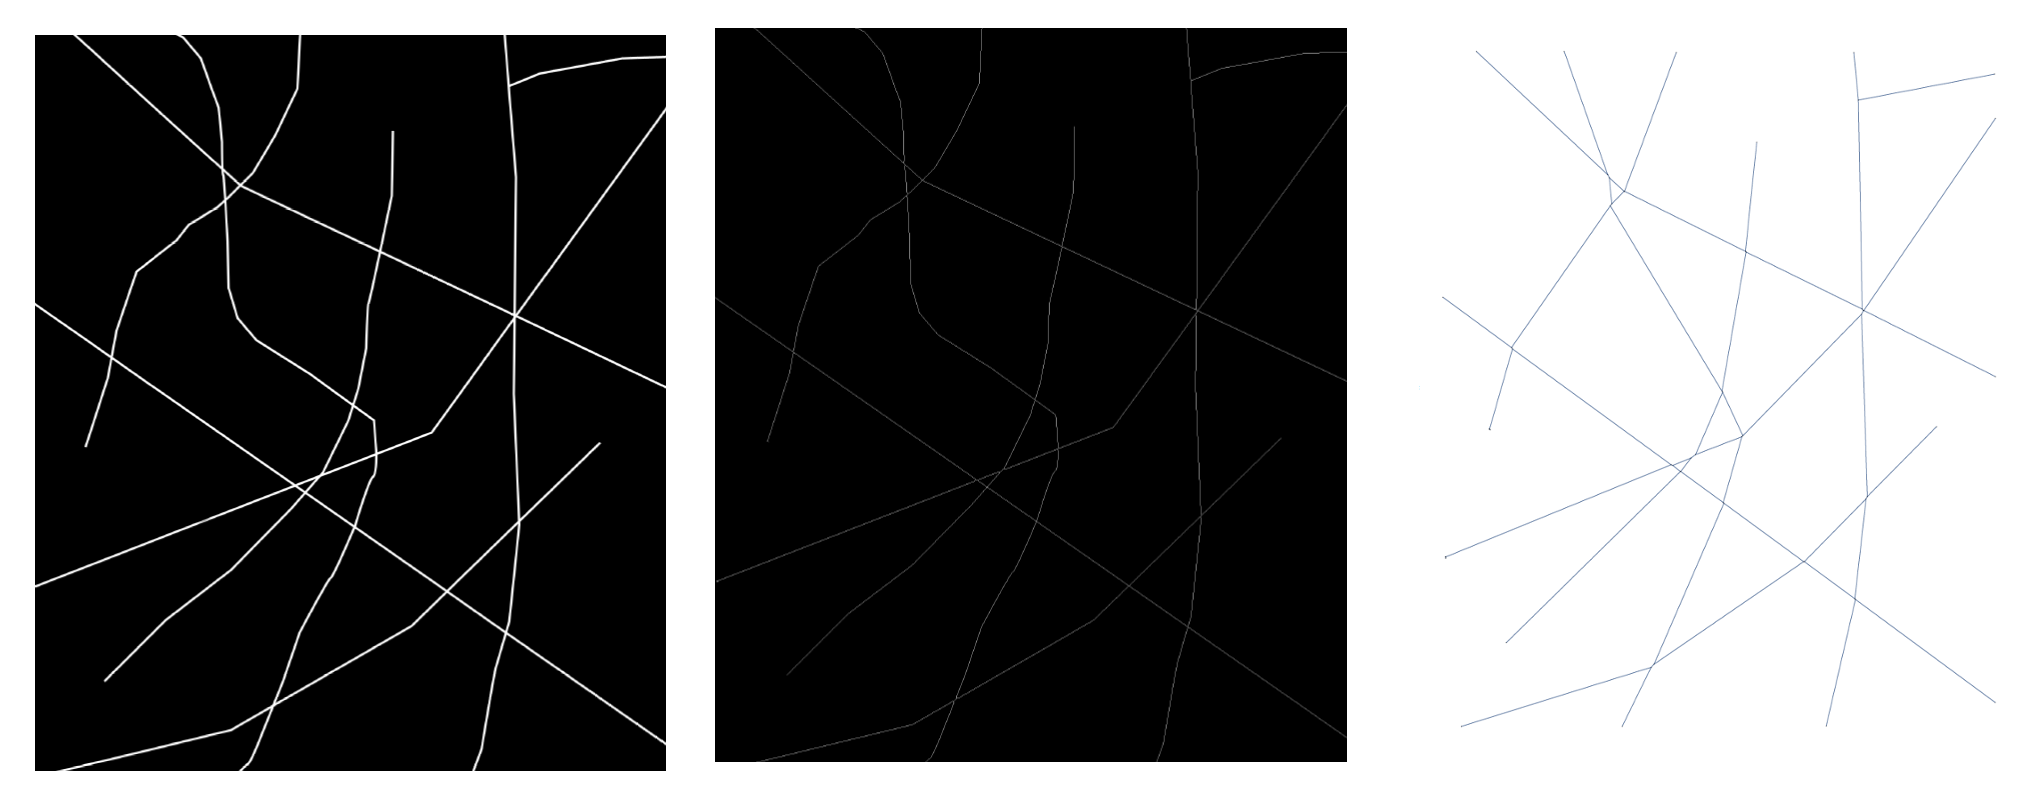 From left to right: initial picture, picture after thinning, converting it to graph